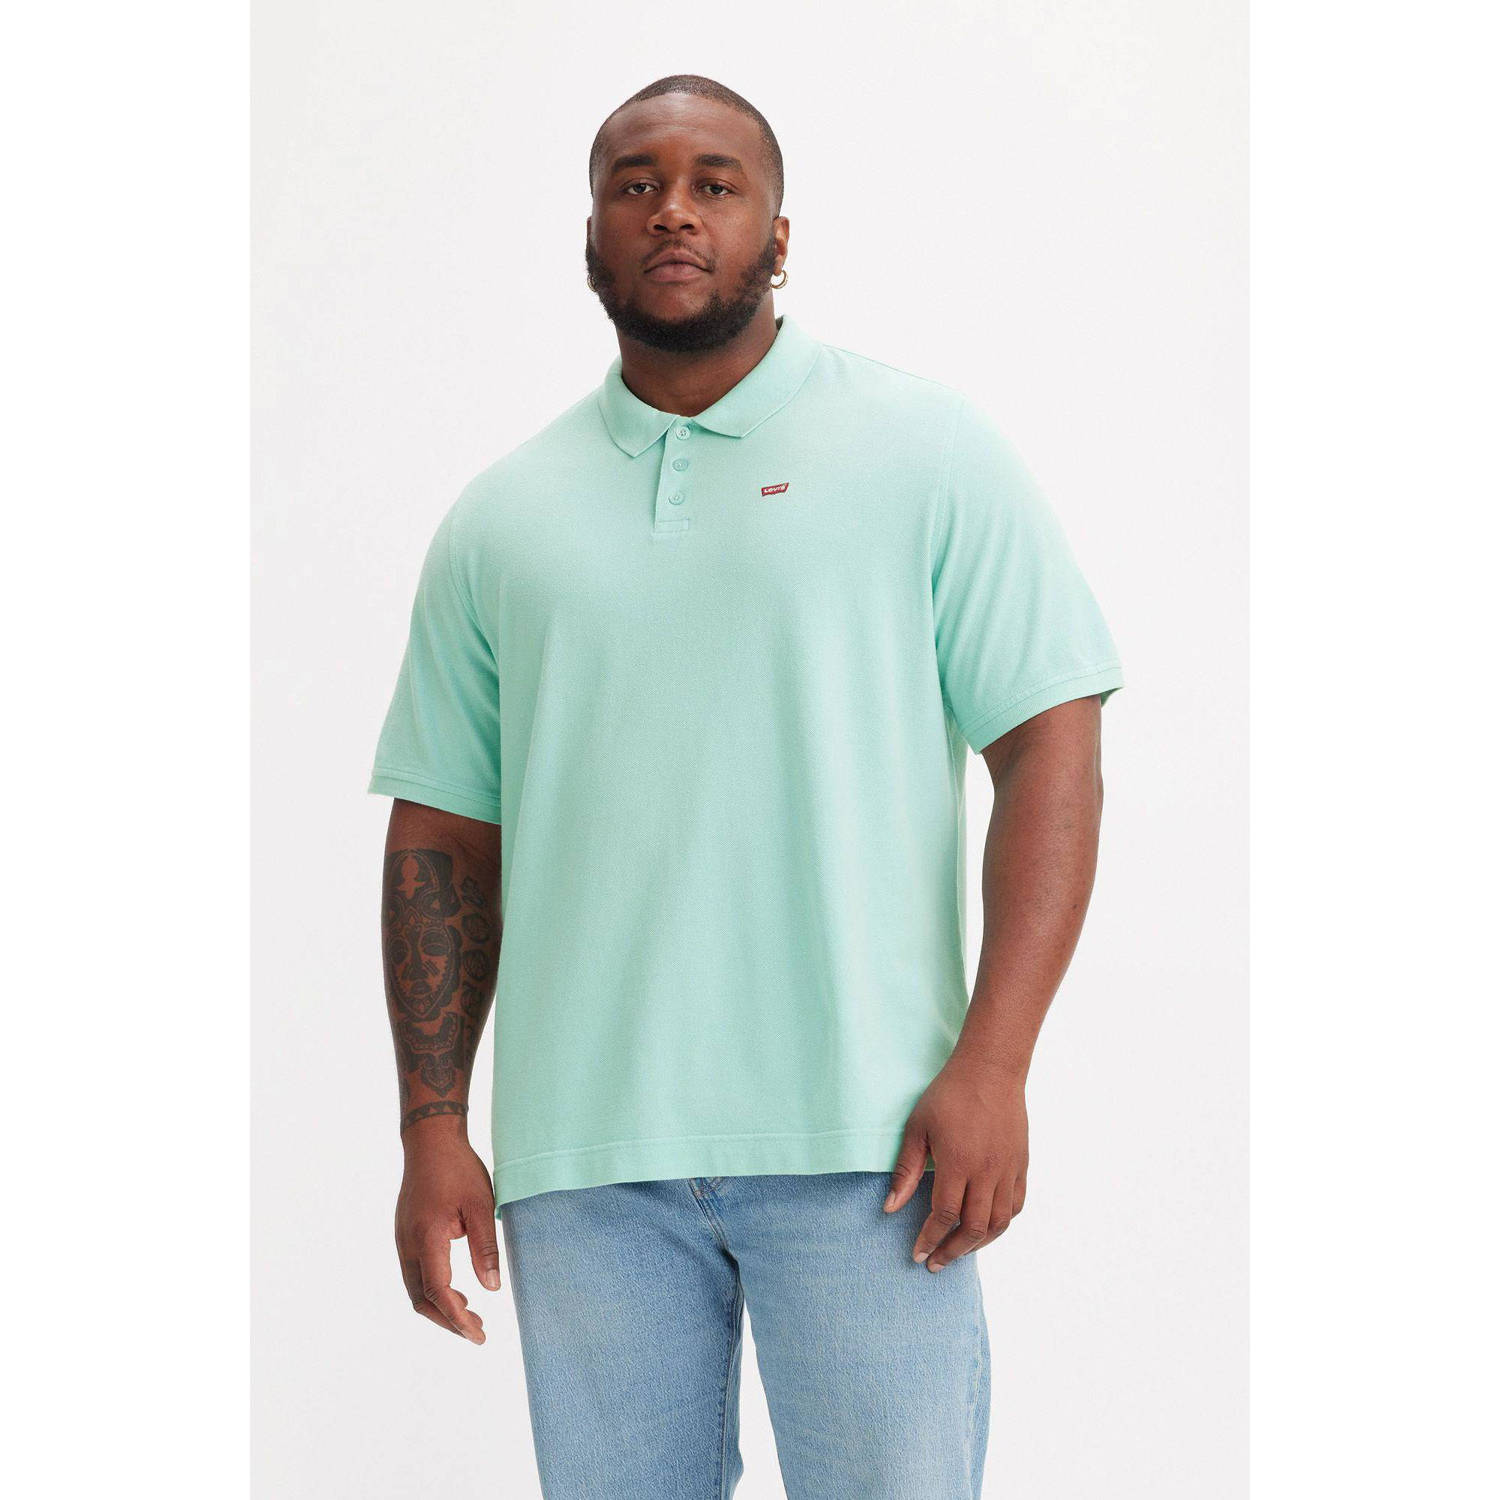 Levi's Big and Tall polo Plus Size met logo pastel turquoise